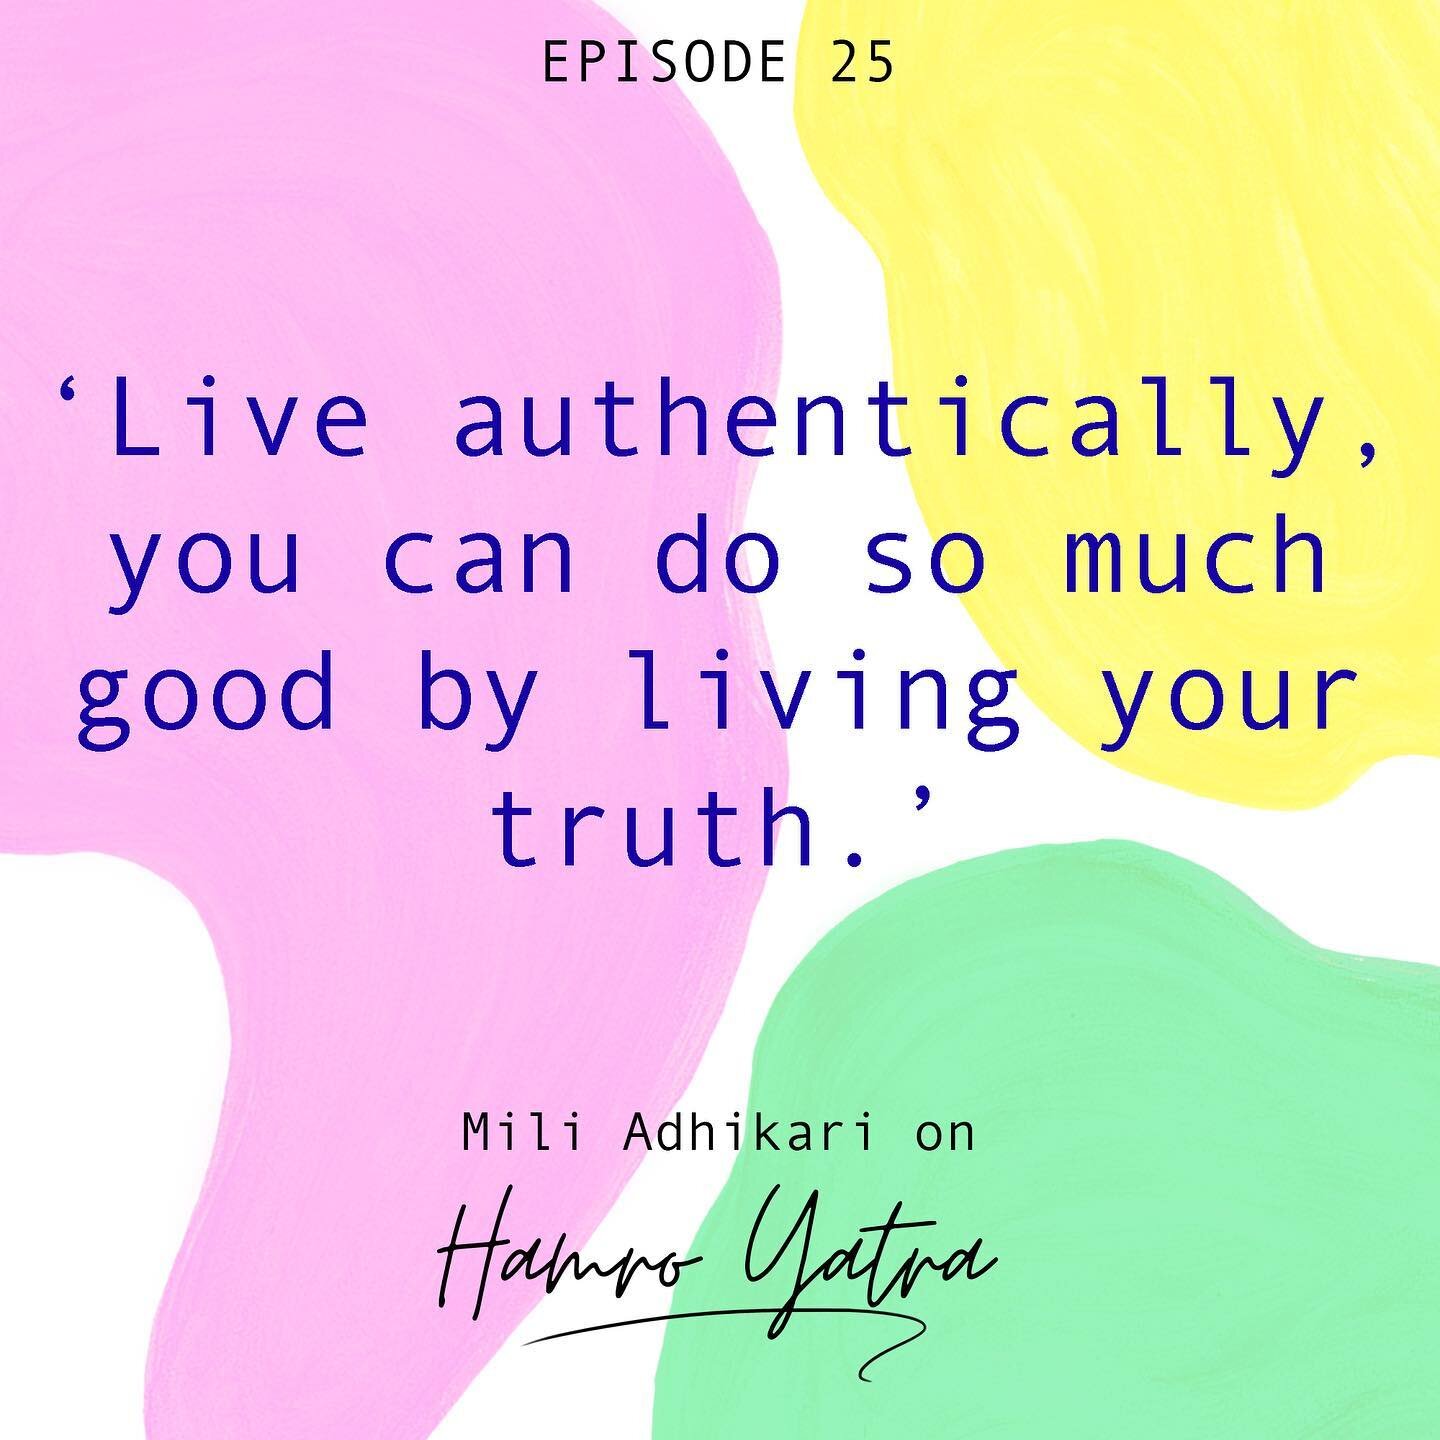 Do you live authentically? Find out on our latest episode with @_milimoonbaby 🌙 listen now on spotify, apple music &amp; wherever you listen to podcasts! Happy Sunday everyone! ✨